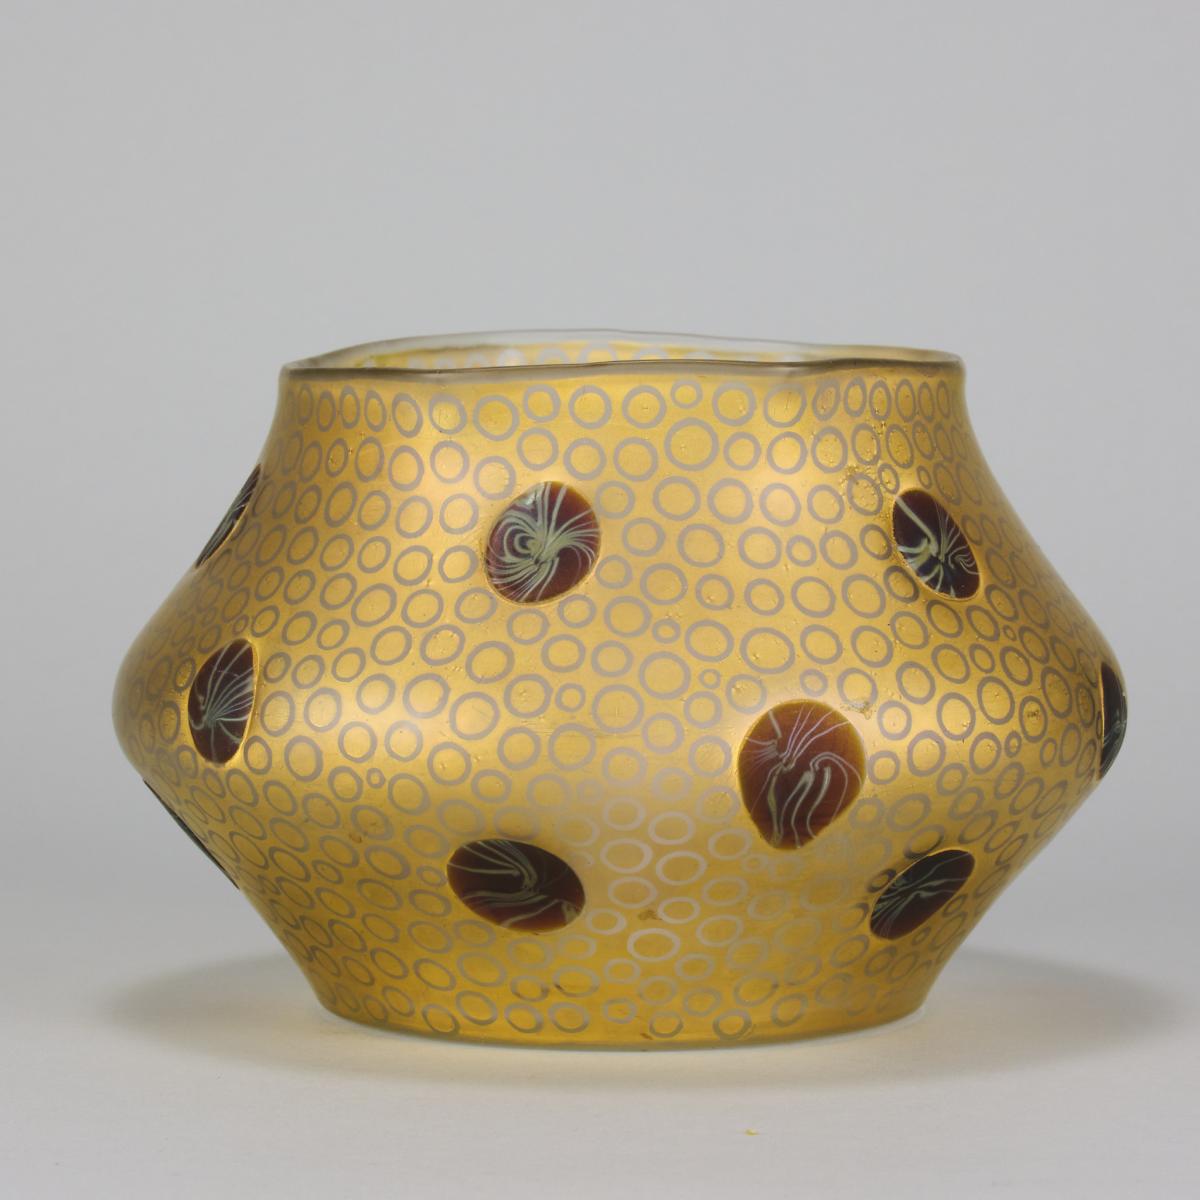 Early 20th Century Vase Entitled "Secessionist Vase" by Loetz Witwe